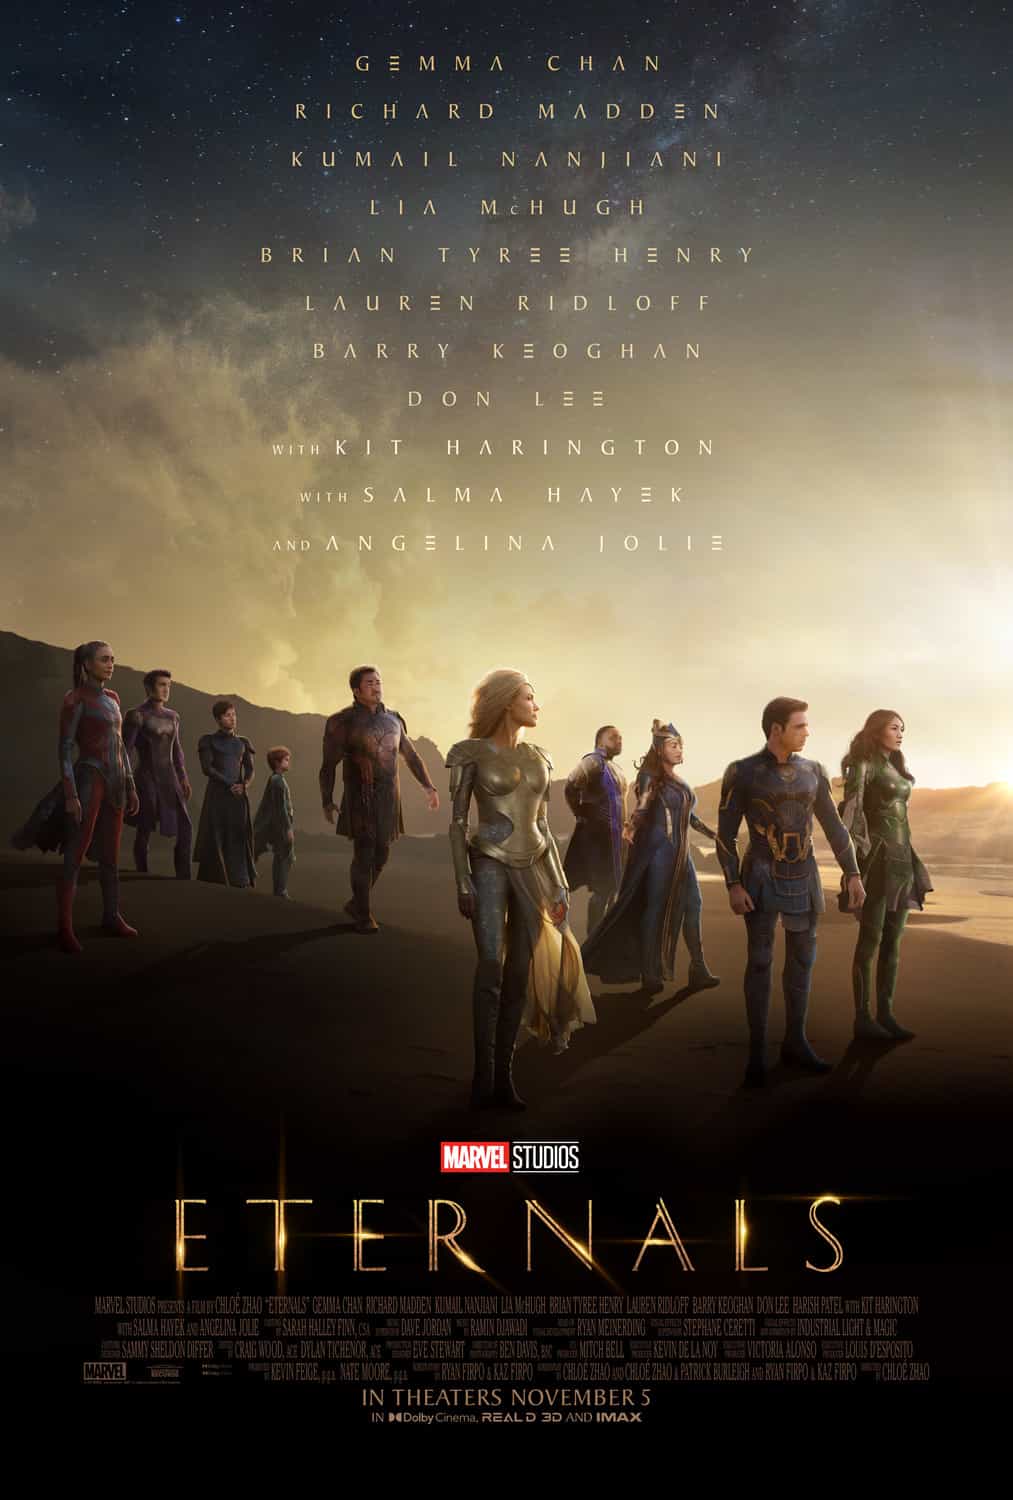 Eternals is given a 12A age rating in the UK for moderate fantasy violence, horror, sex, rude gesture